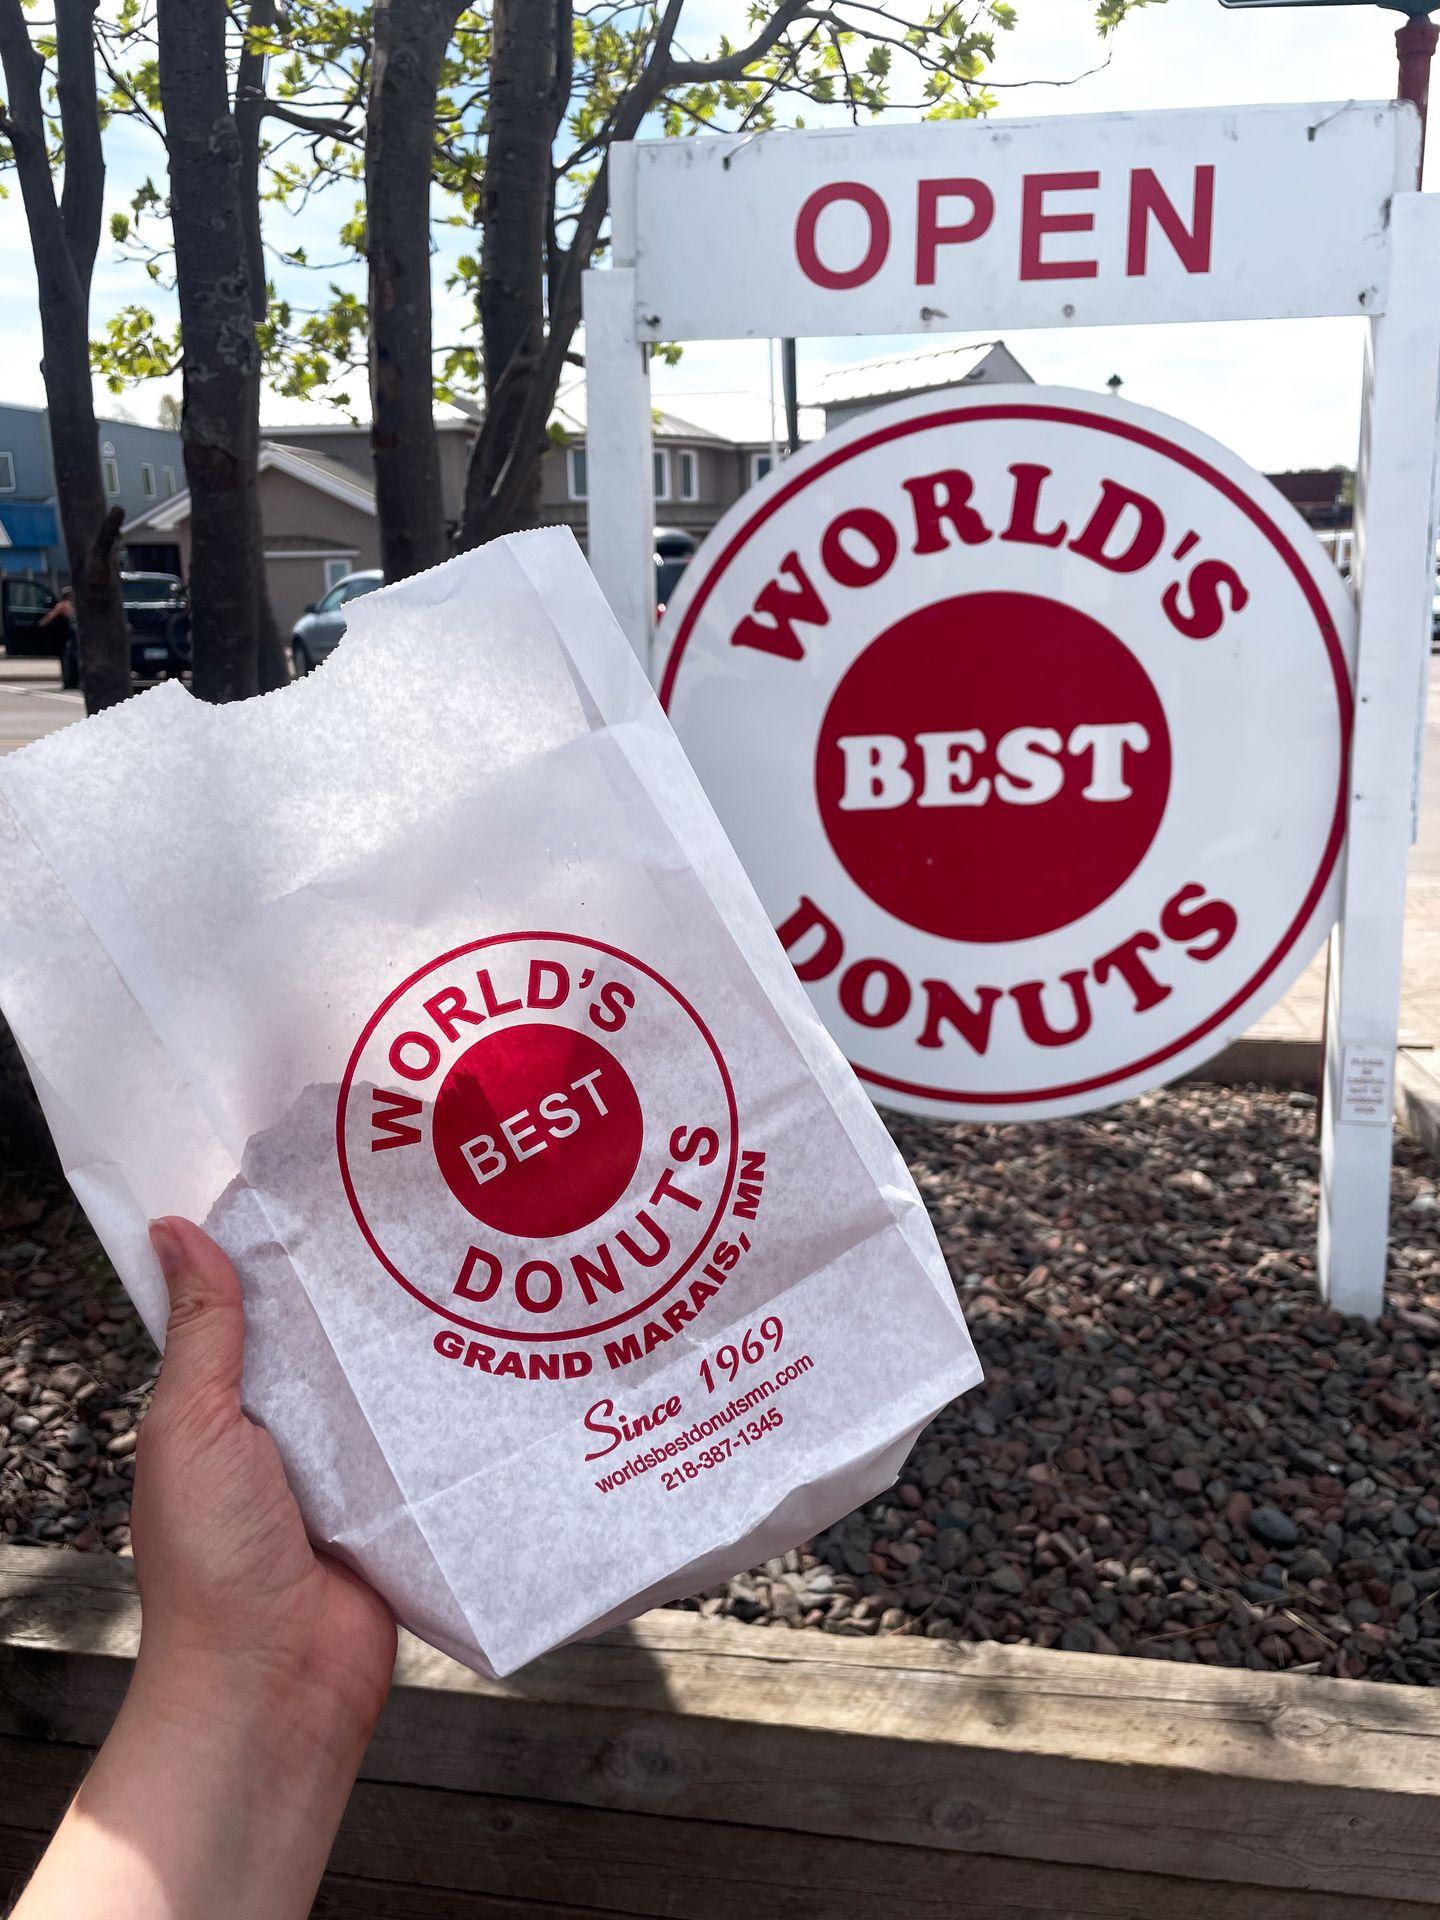 Holding up a bag of donuts in front of World's Best Donuts in Grand Marias, MN.